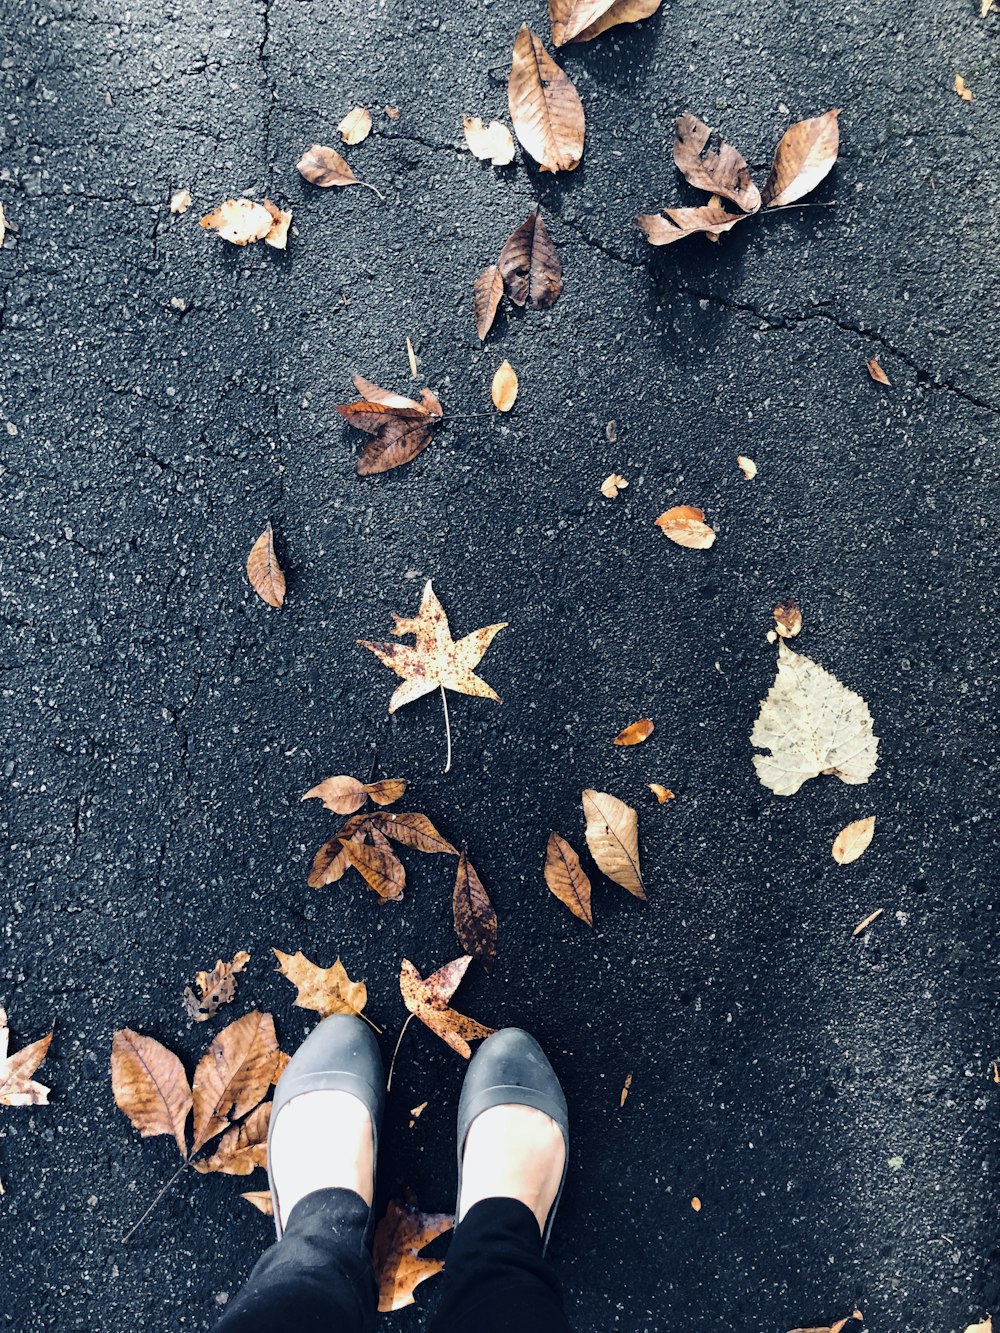 woman wearing black leather flats standing on pavement near withered leaves